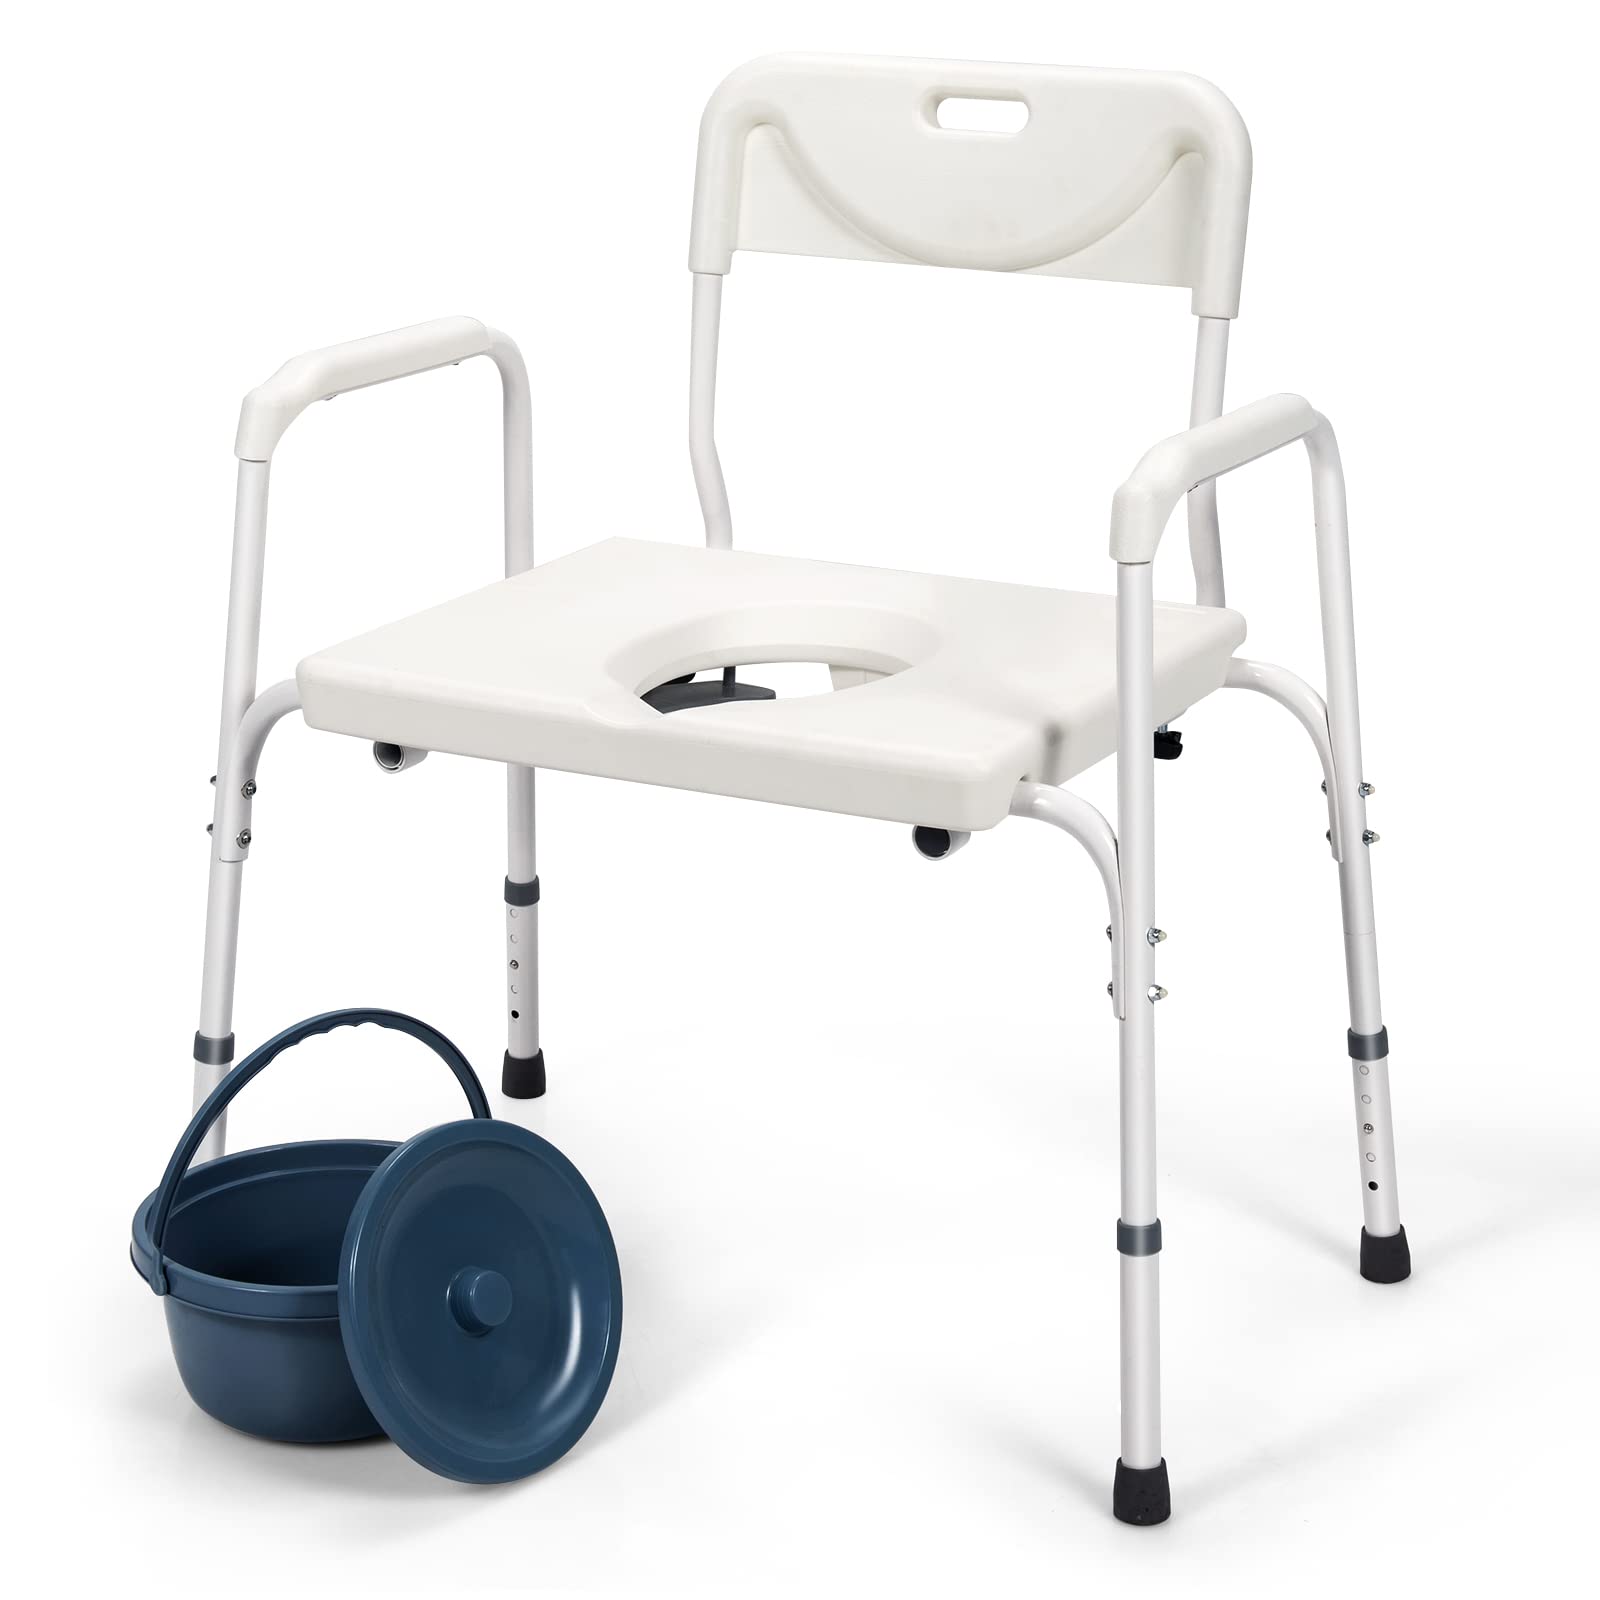 Giantex 3-in-1 Bedside Commode Chair